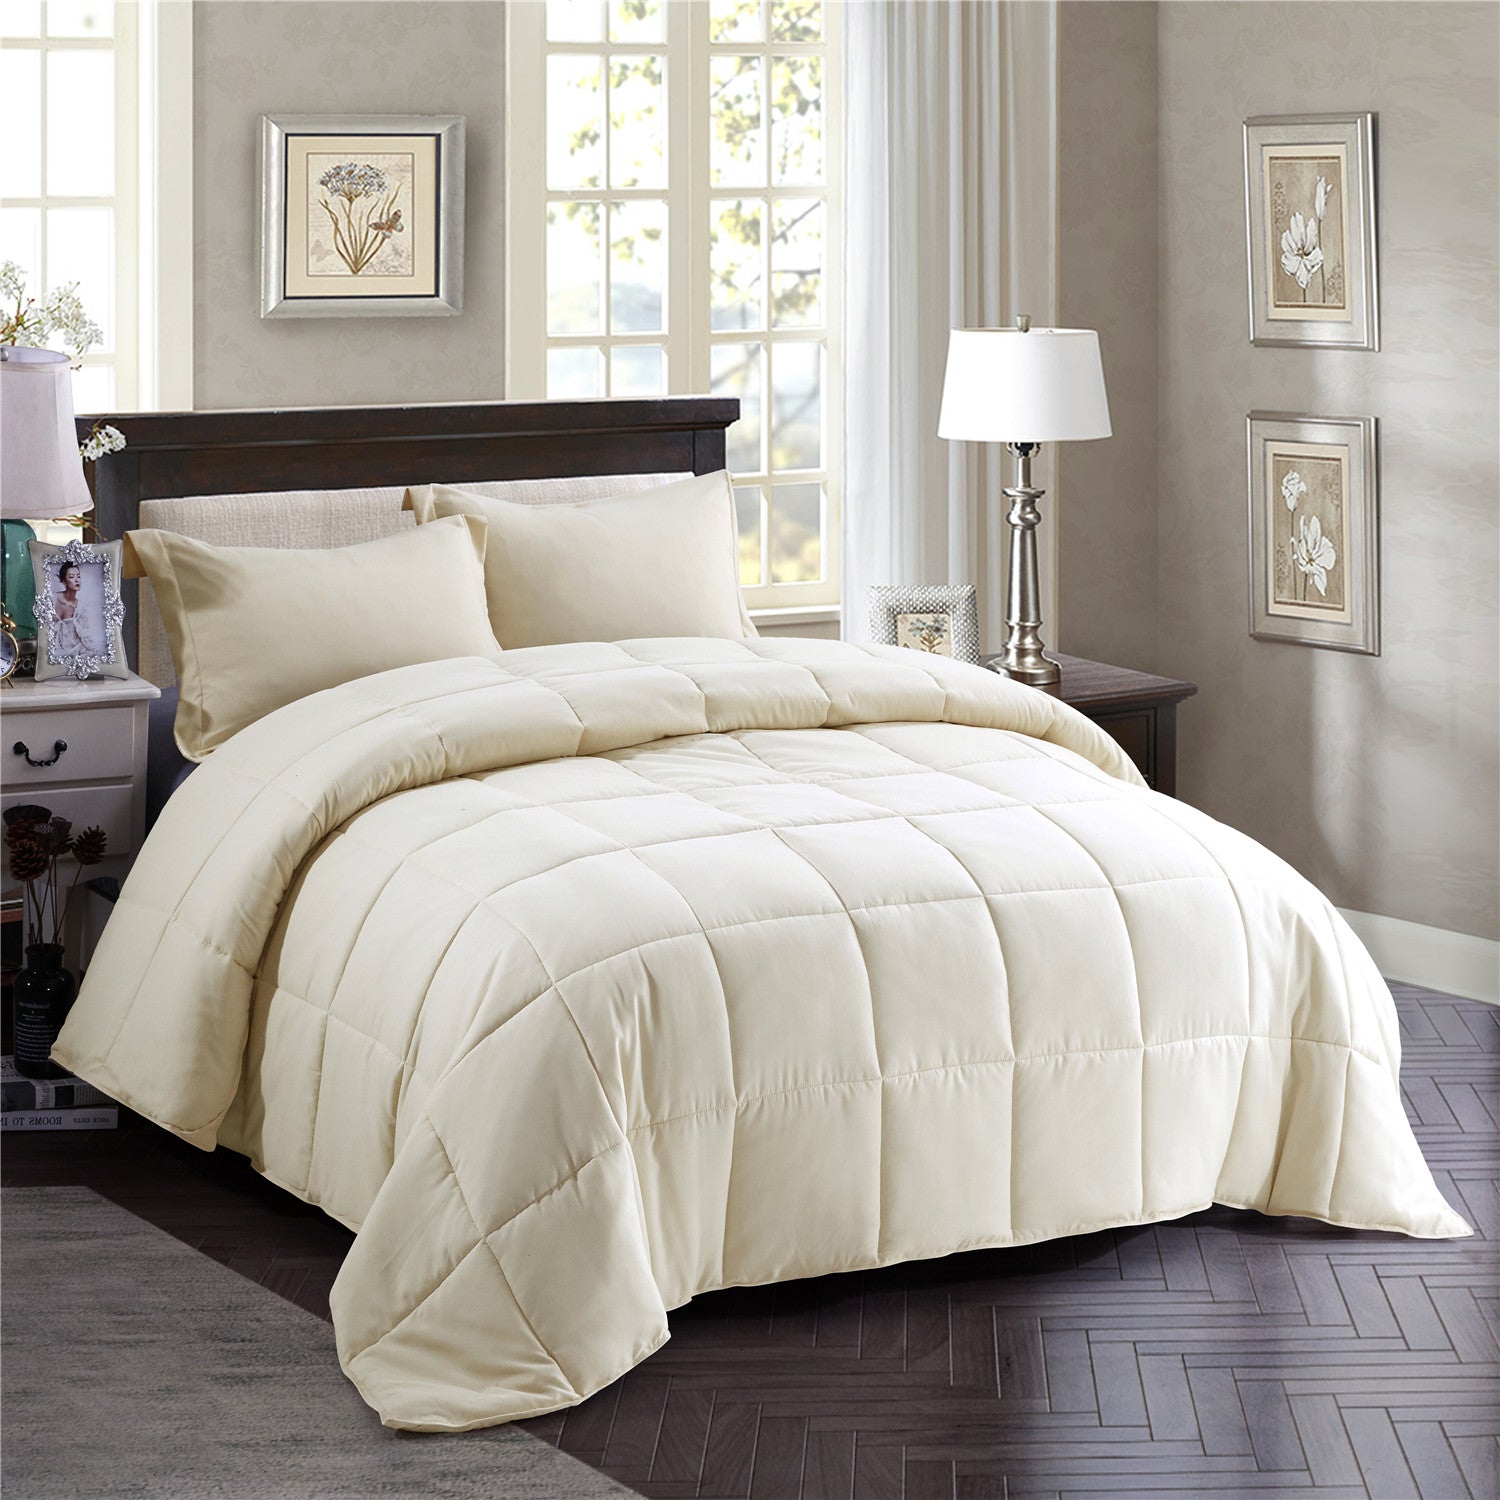 ALTERNATIVE DOWN 3PC COMFORTER. PERFECT FOR ANY SEASON. ULTRA SOFT MICROFIBER COVER. IVORY